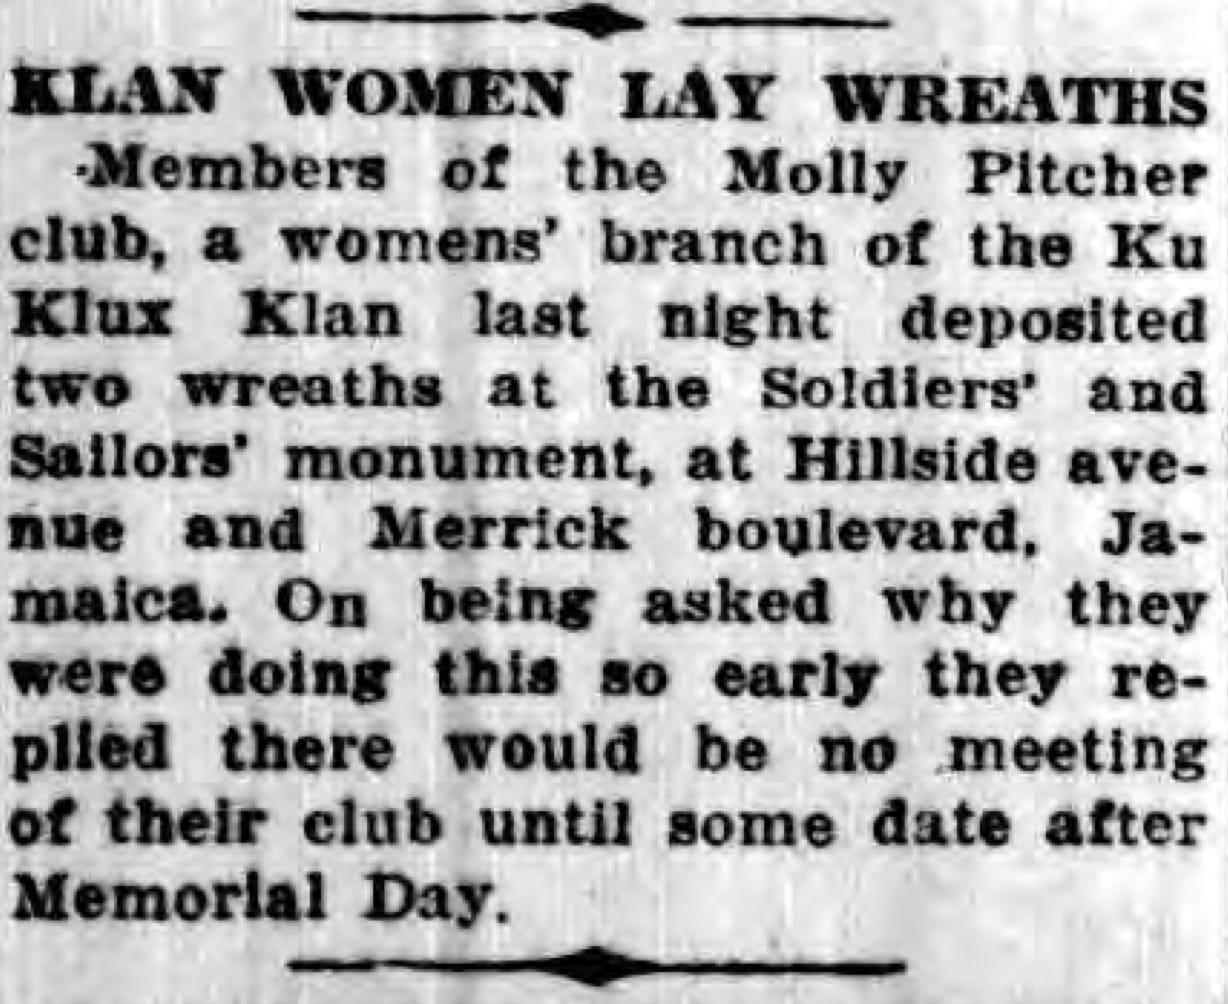 Image is a small newspaper clipping with headline "KLAN WOMEN LAY WREATHS" 